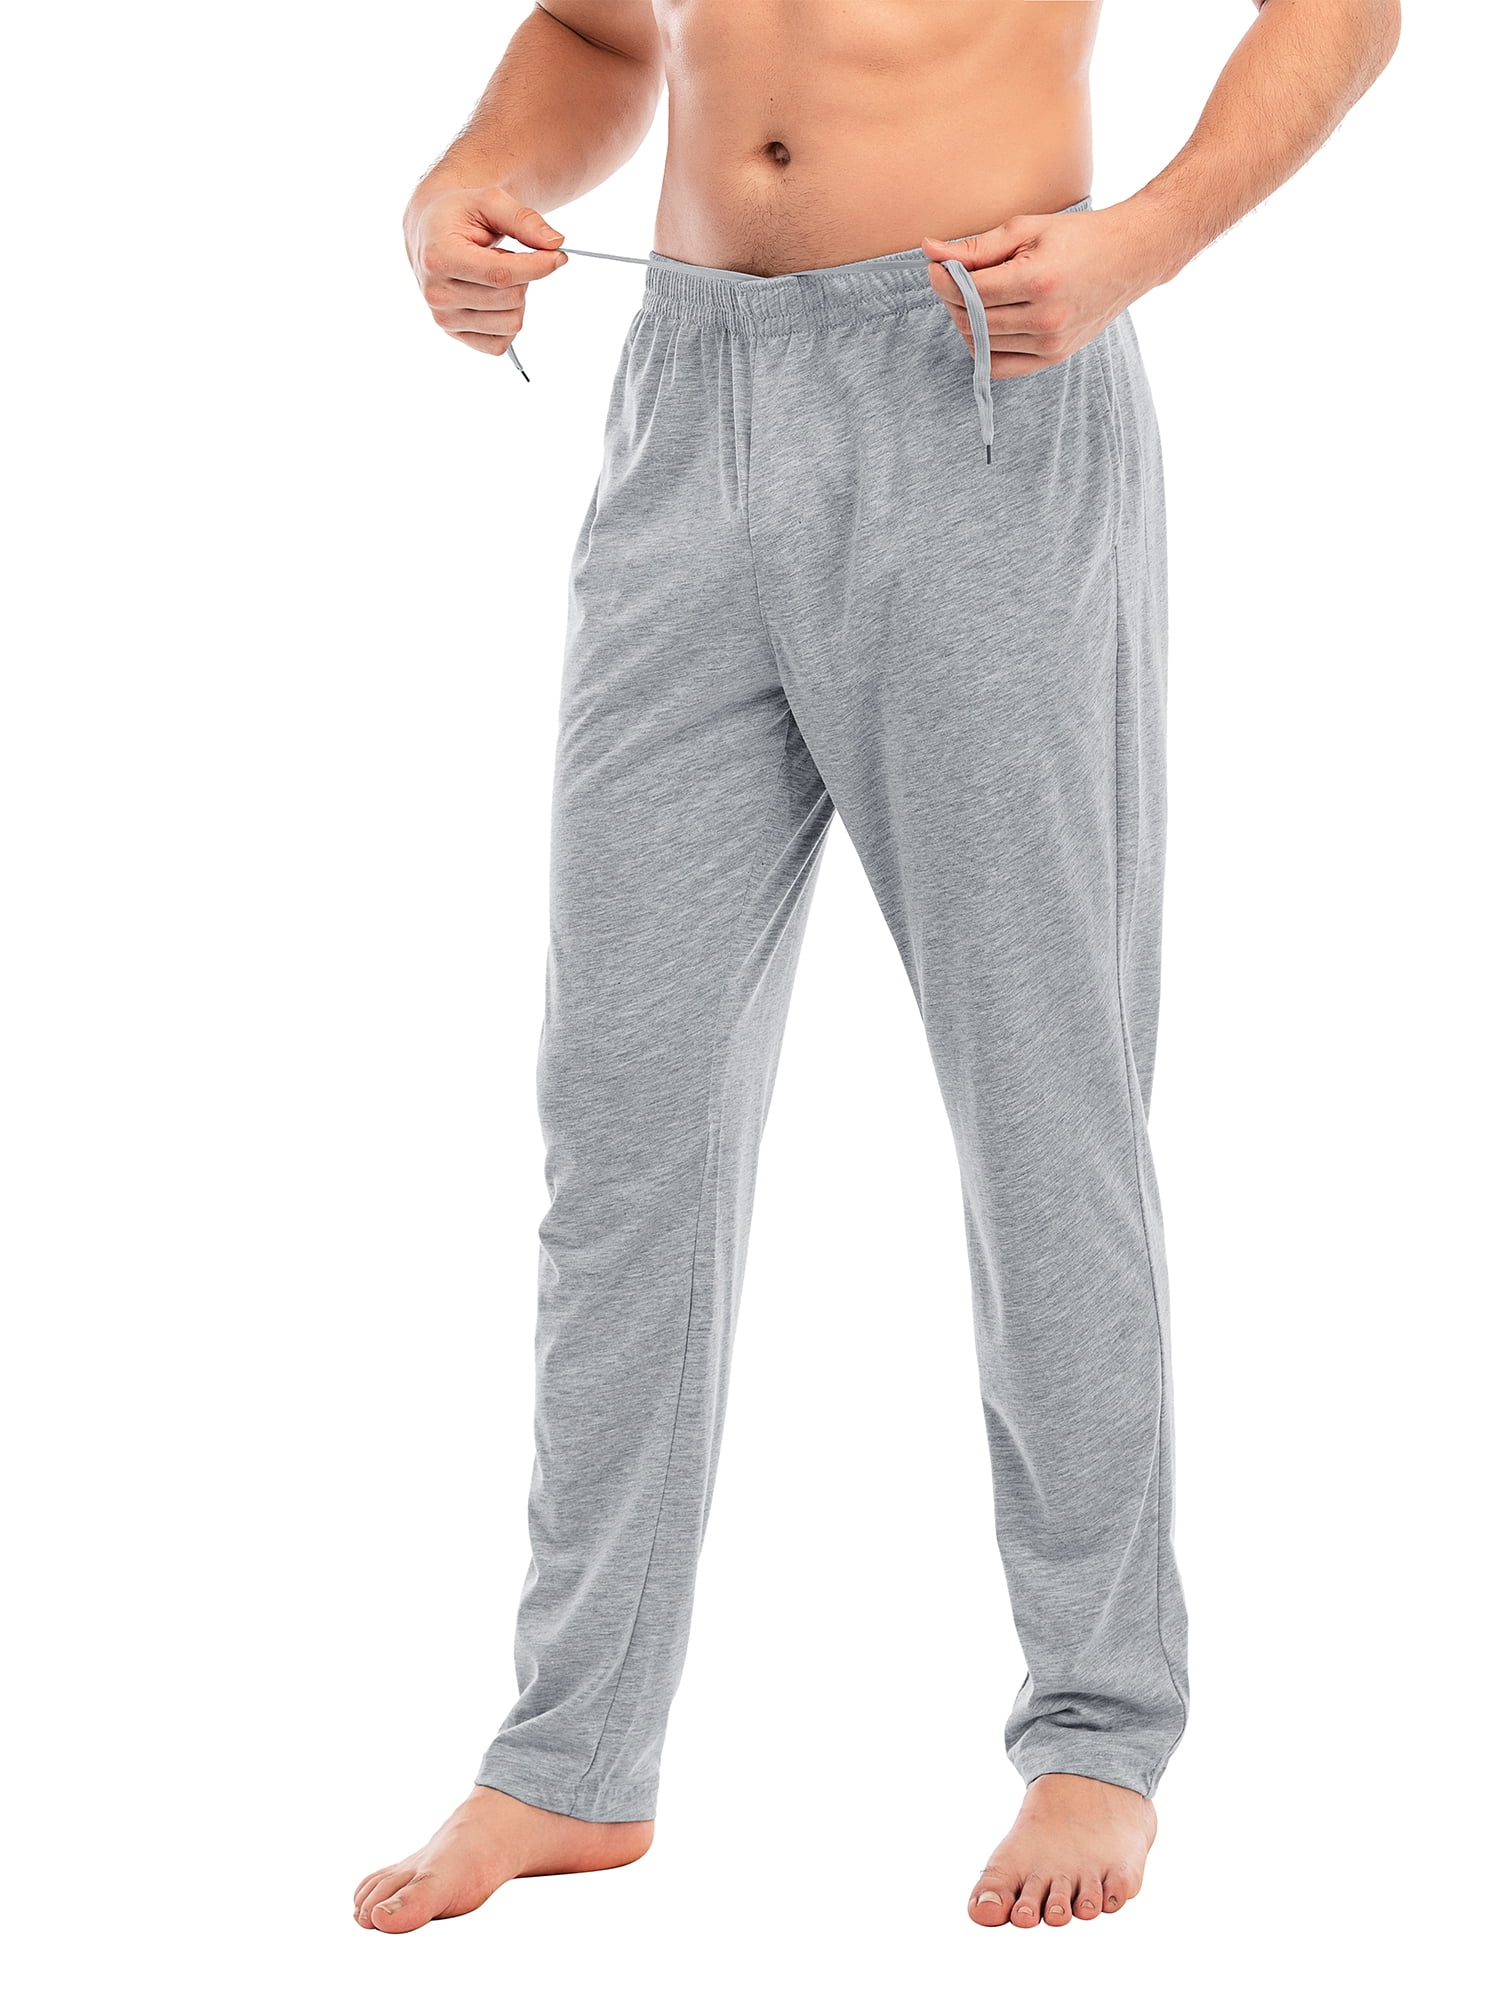 BRIEF INSANITY Funny Loungewear Pajama Pants (S-XXL) - Durable Loose Fit  Lost My Nuts Pants - Comfy Homewear Sleep Pants… Multicolored at Amazon  Men's Clothing store